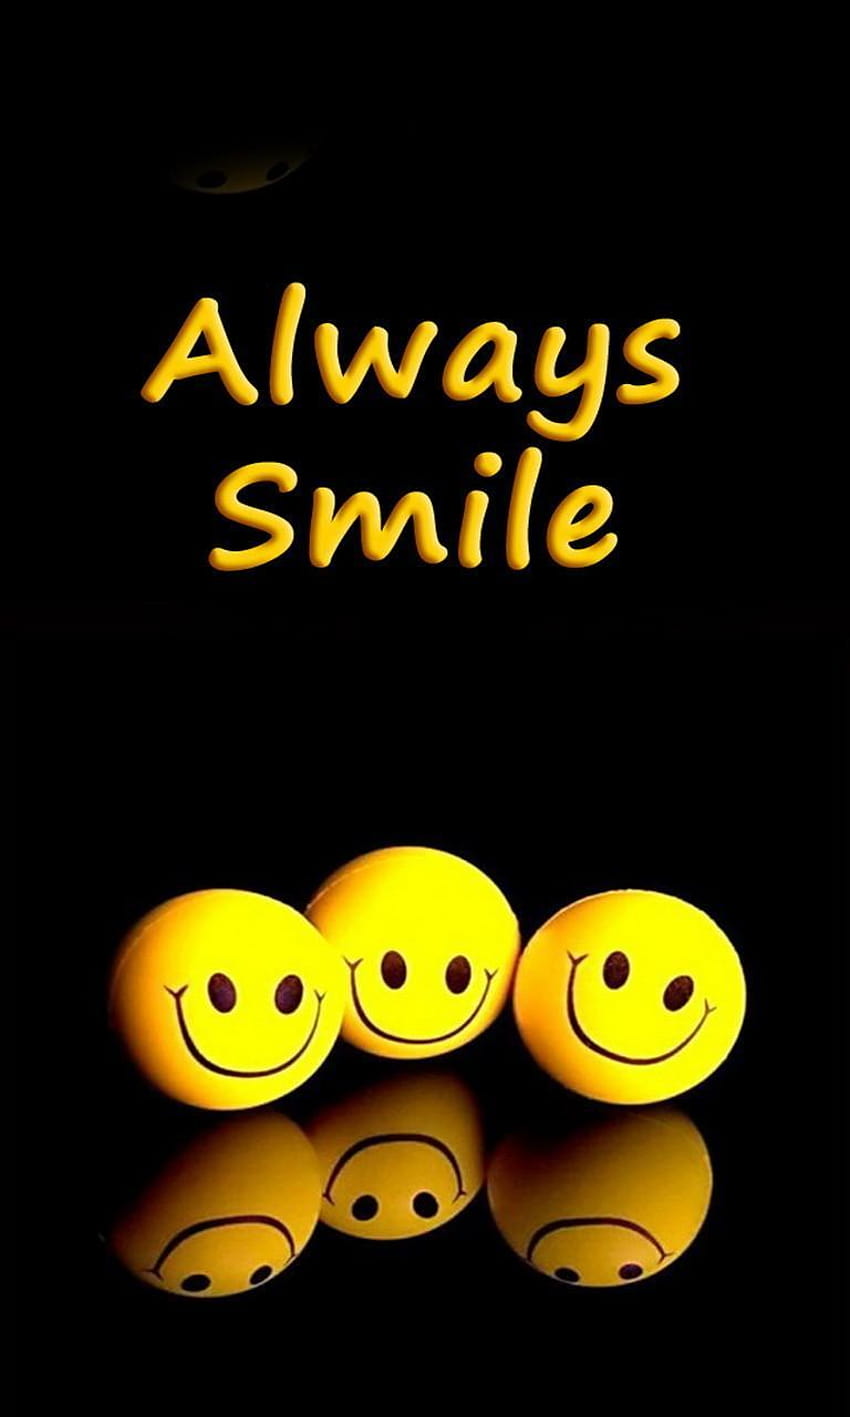 Smile for Android, always smile HD phone wallpaper